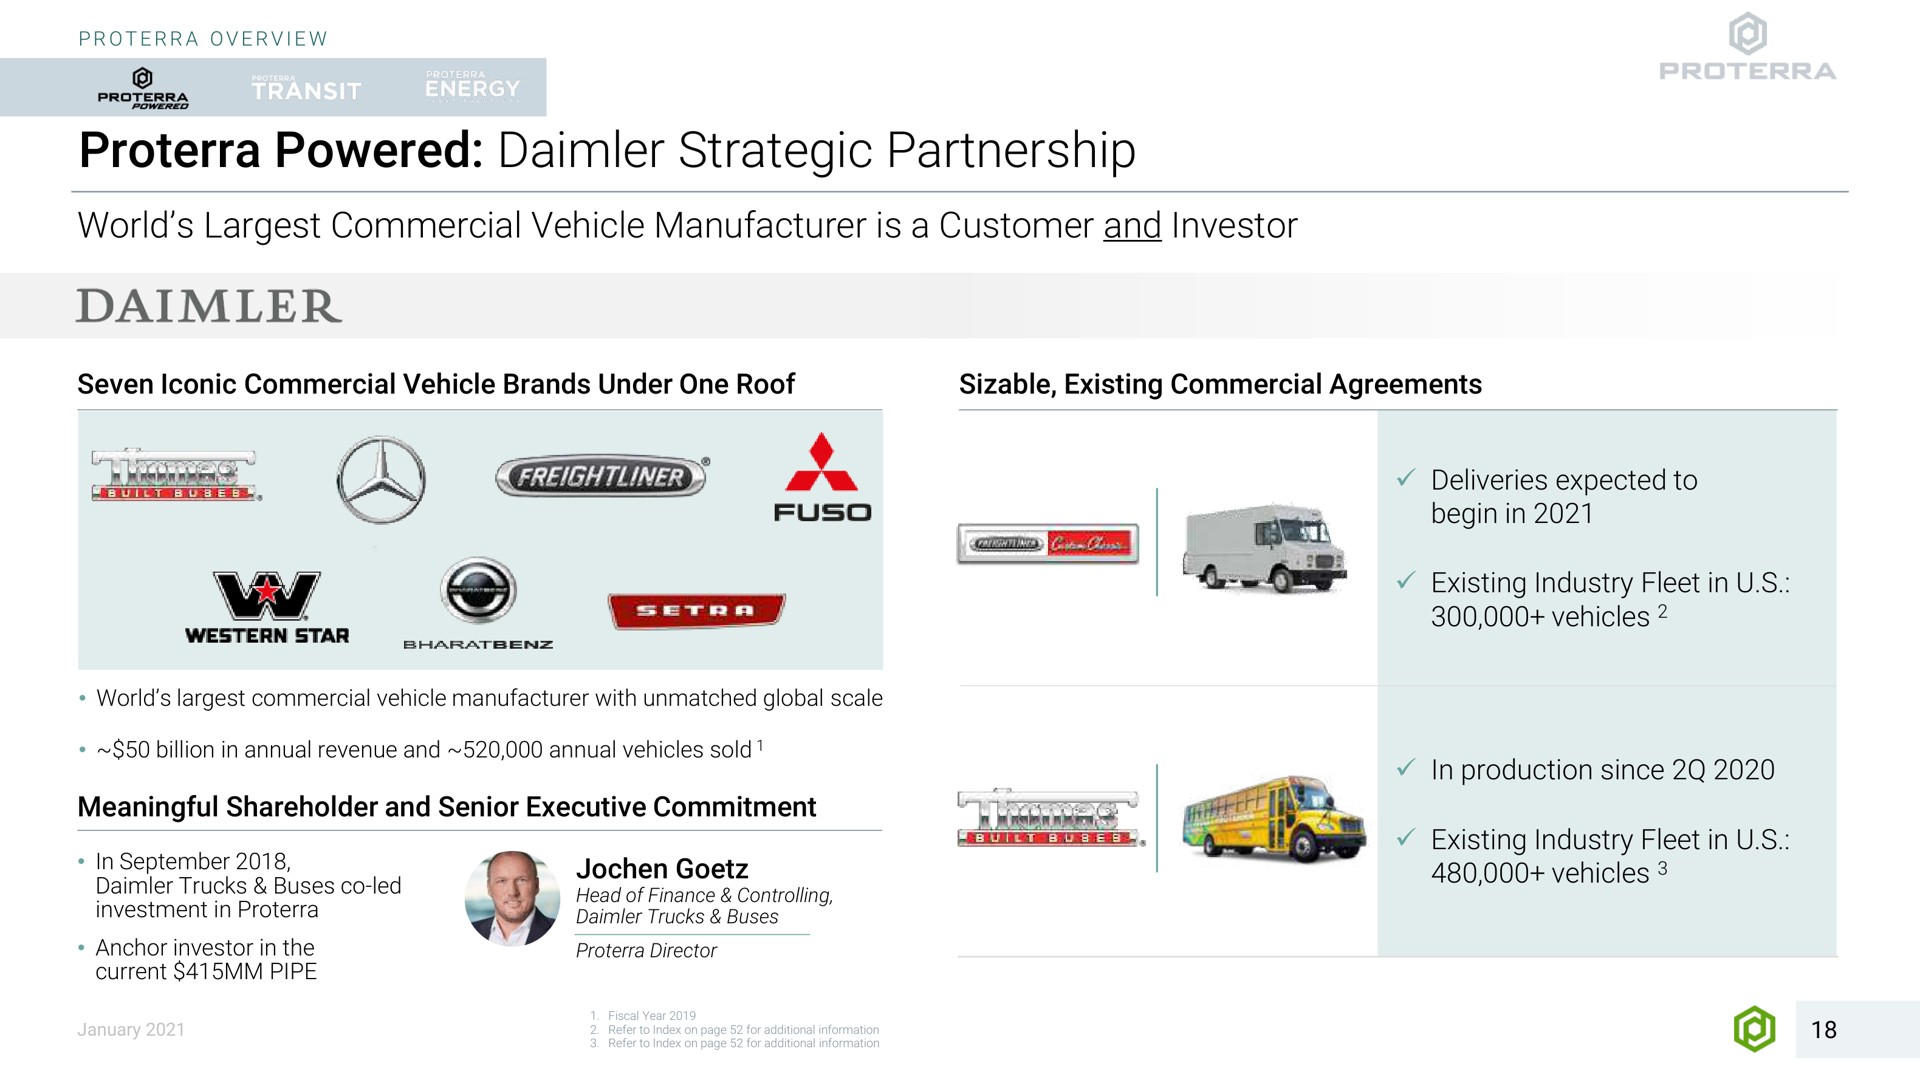 powered strategic partnership world commercial vehicle manufacturer is a customer and investor seven iconic commercial vehicle brands under one roof sizable existing commercial agreements centile i deliveries expected to met ear world commercial vehicle manufacturer with unmatched global scale billion in annual revenue and annual vehicles sold meaningful shareholder and senior executive commitment in trucks buses led anchor investor in the current pipe head of finance controlling director existing industry fleet in vehicles in production since a existing industry fleet in vehicles in for additional | Proterra